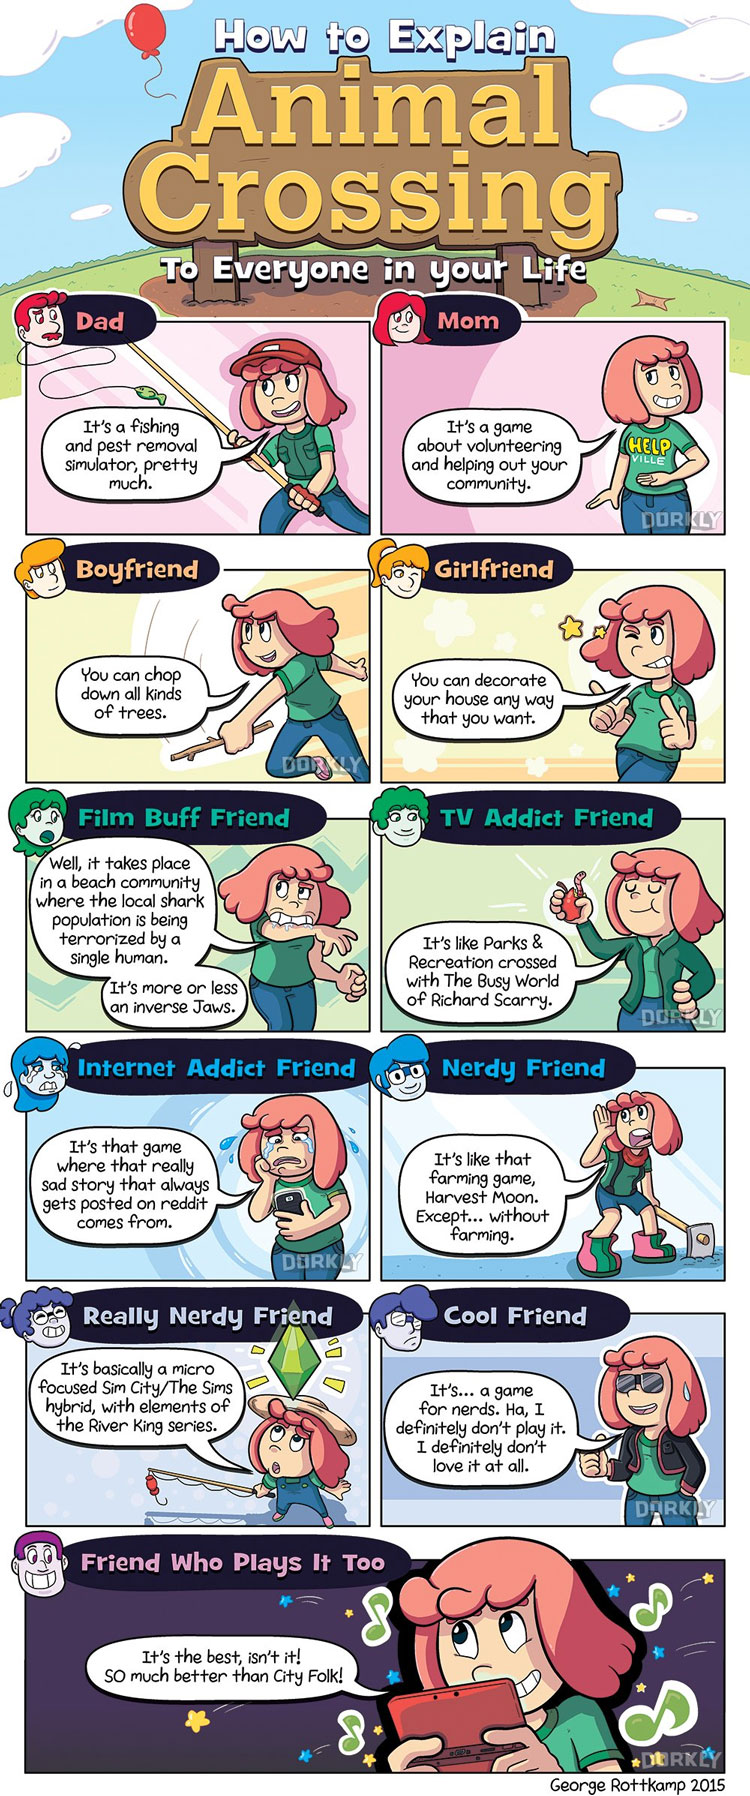 How to Explain Animal Crossing...